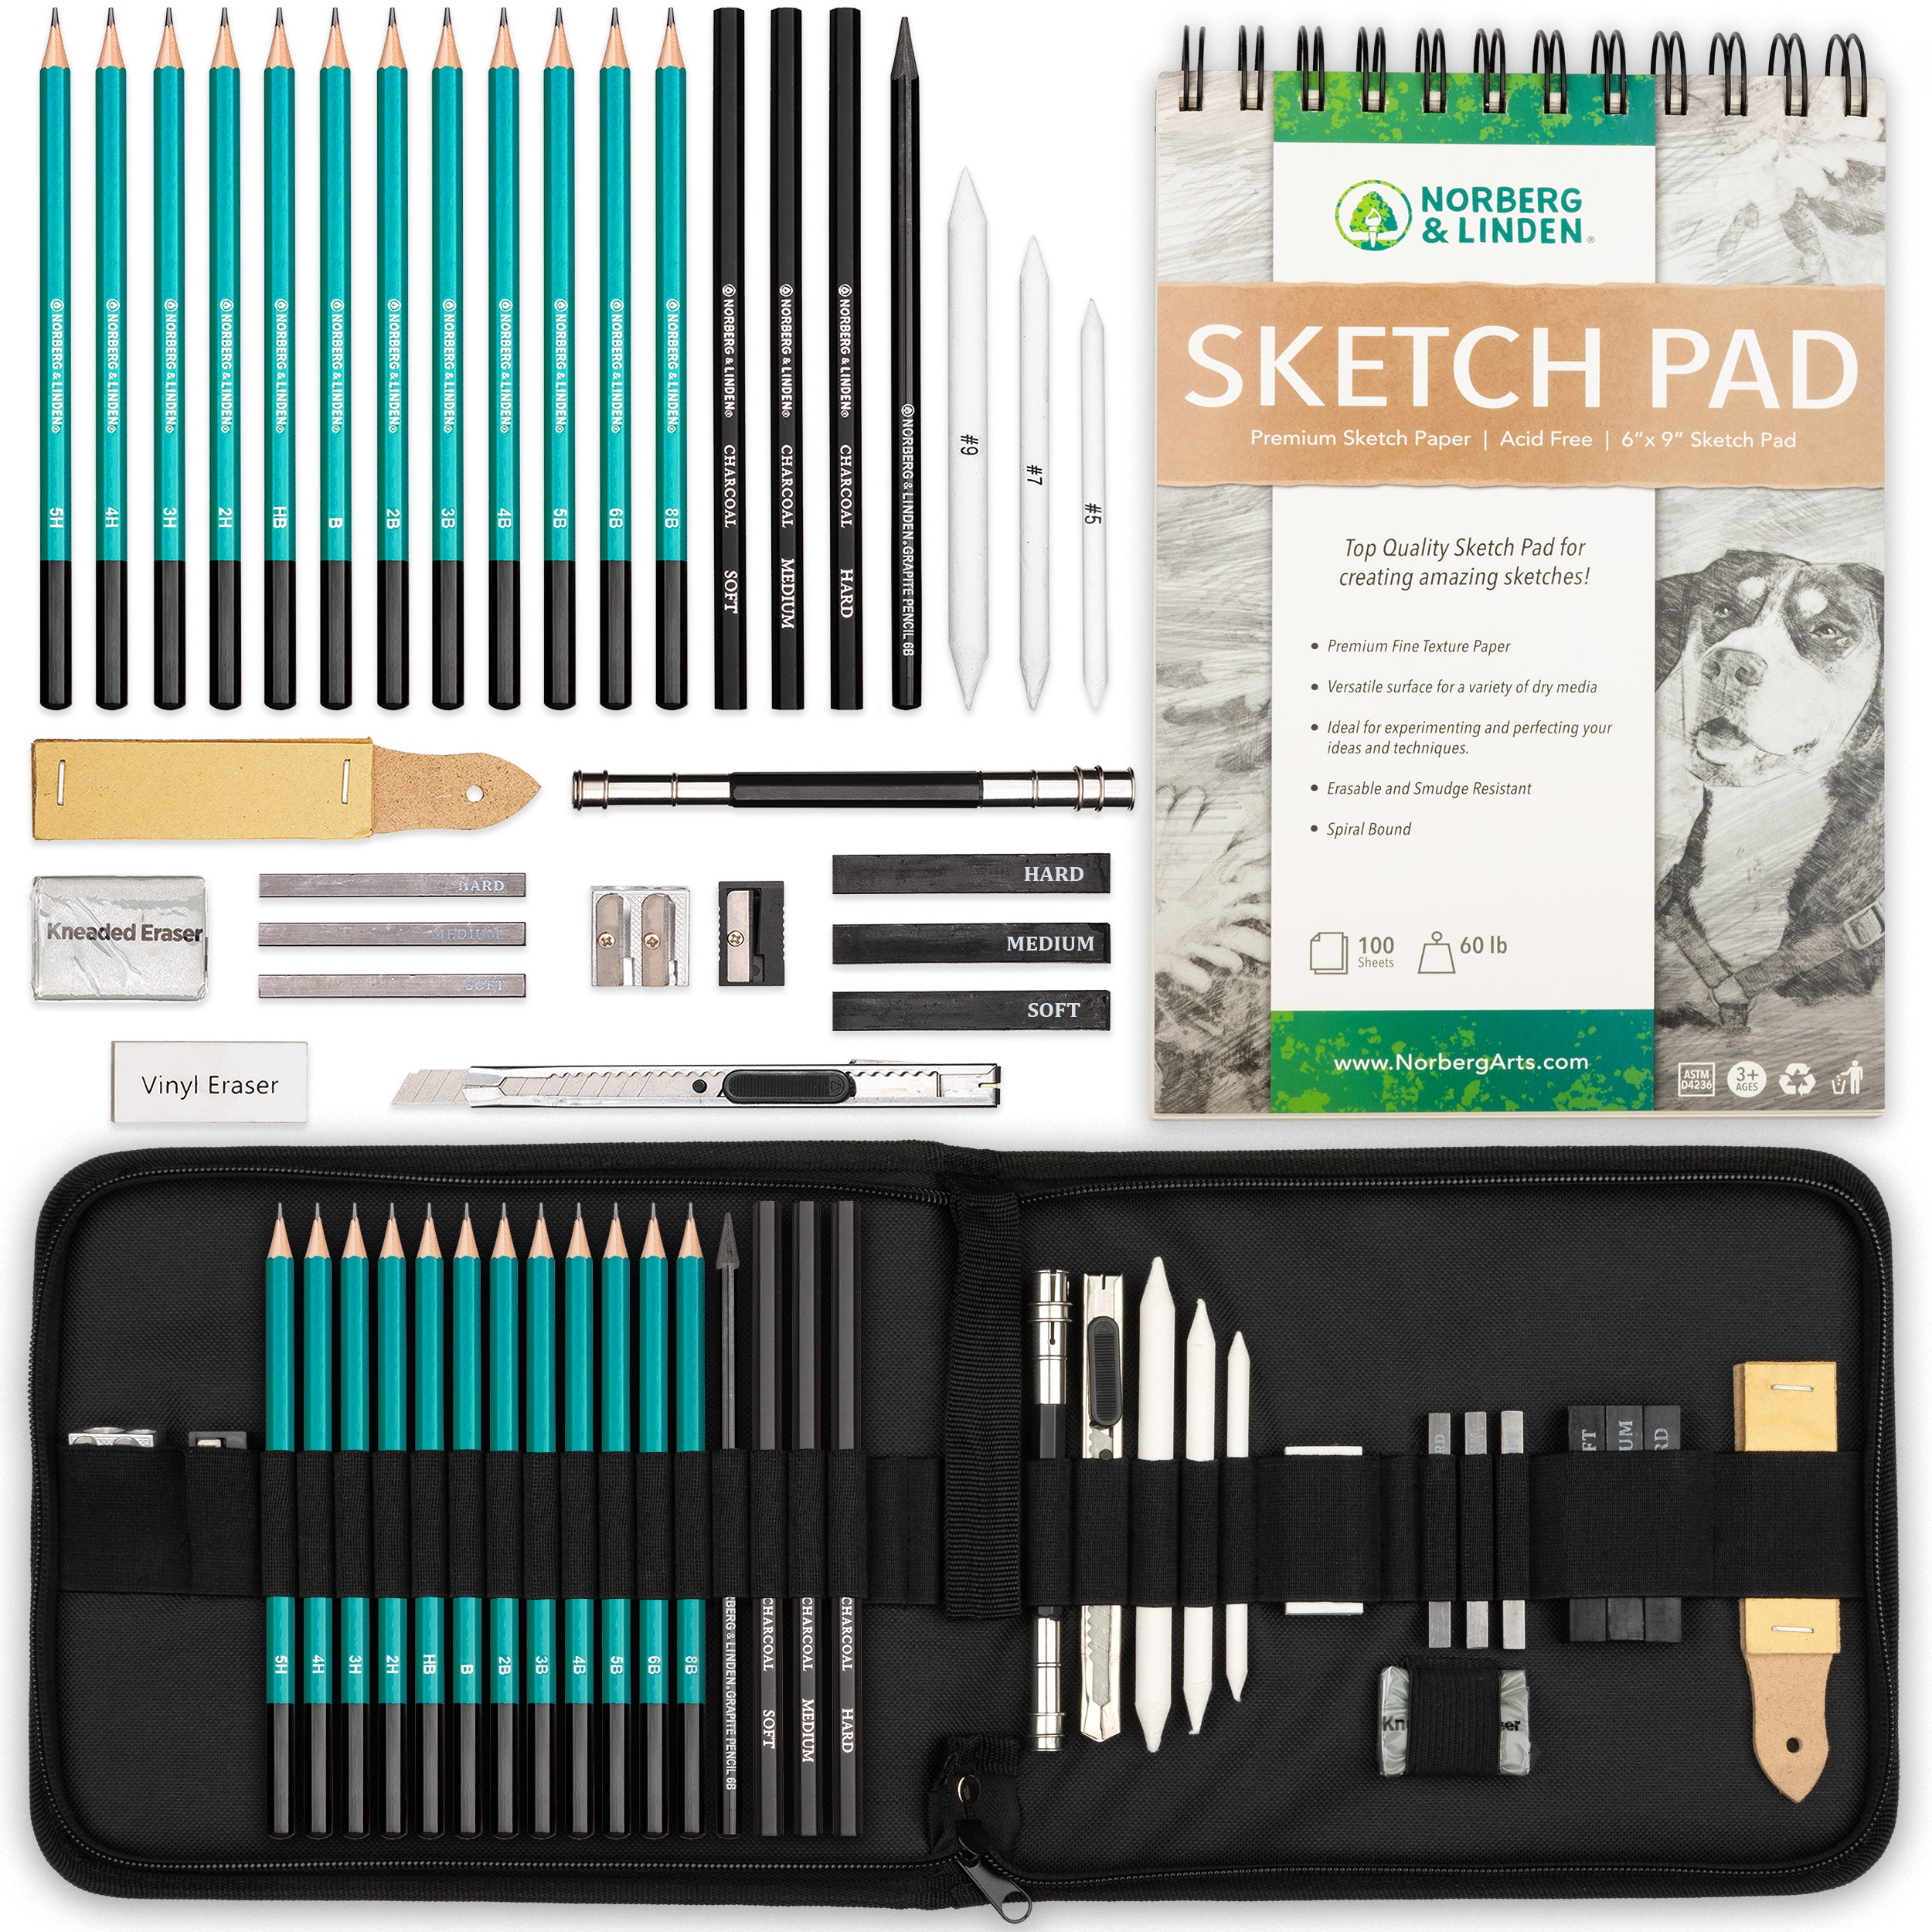 writing & drawing instrument accessories, Discover trusted products